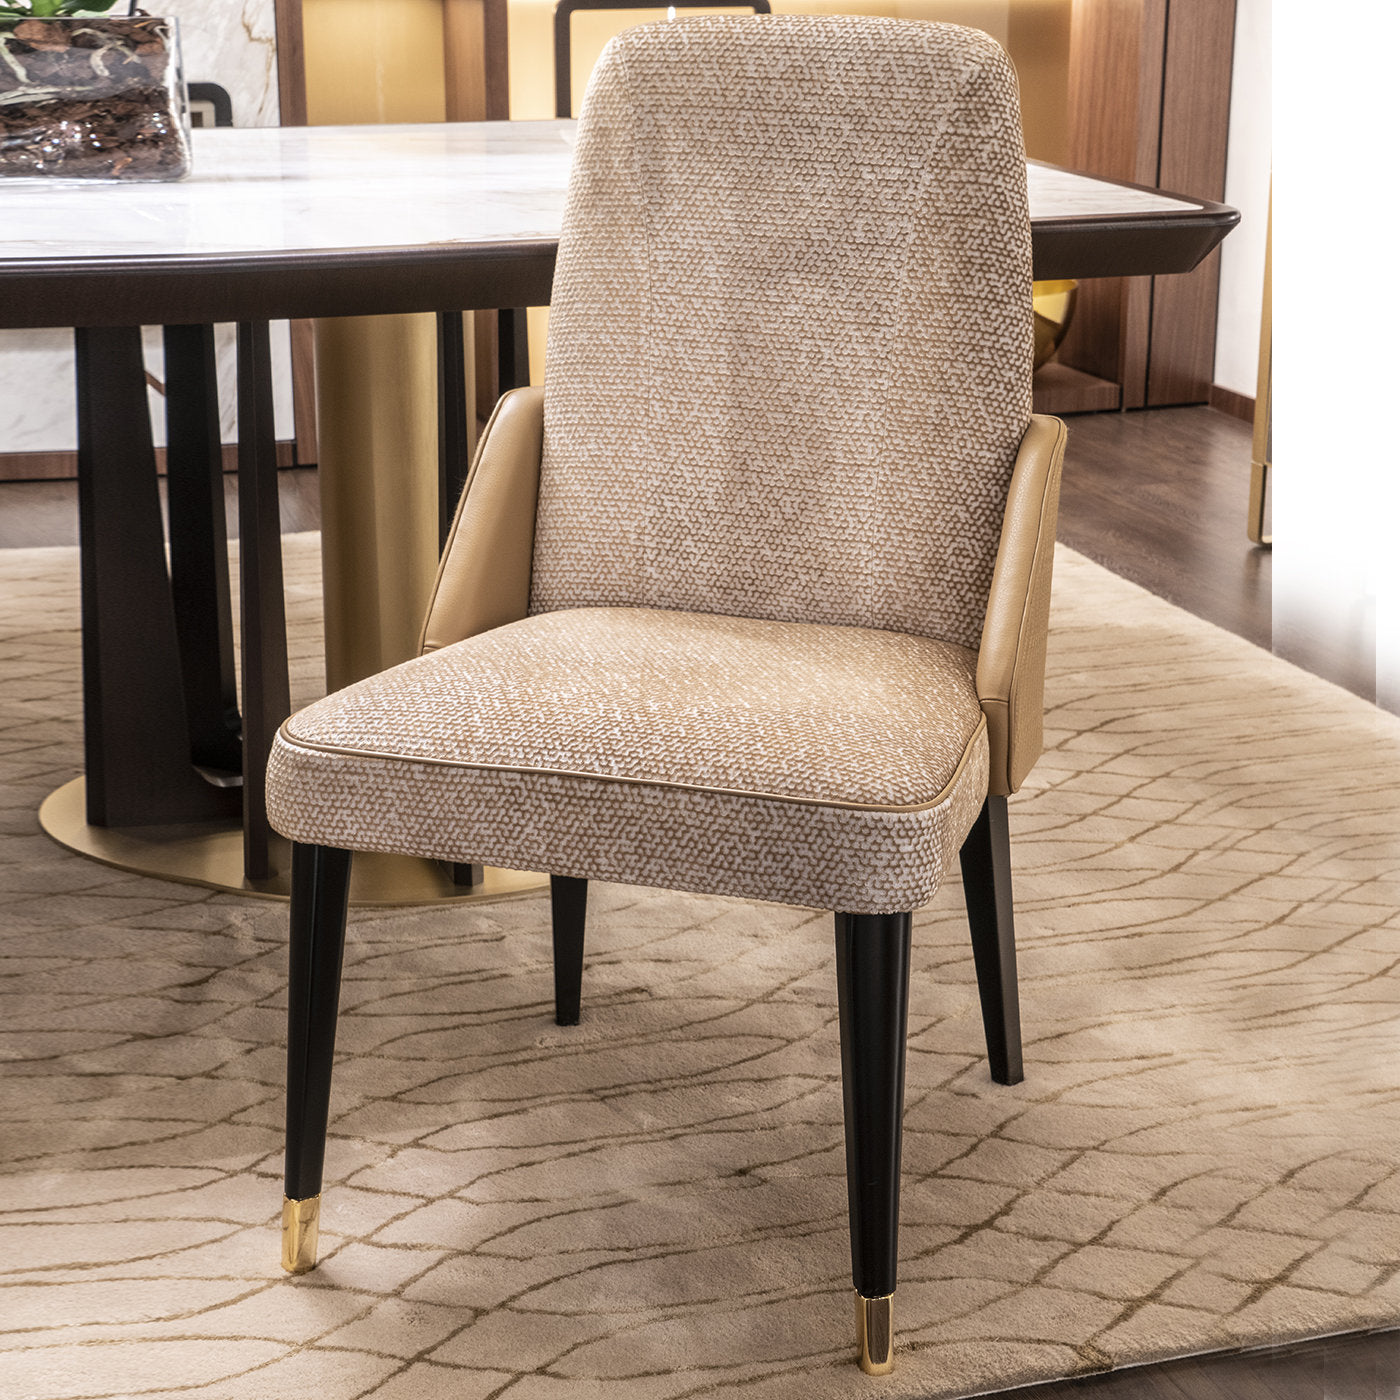 Caprice Dining Chair - Alternative view 2